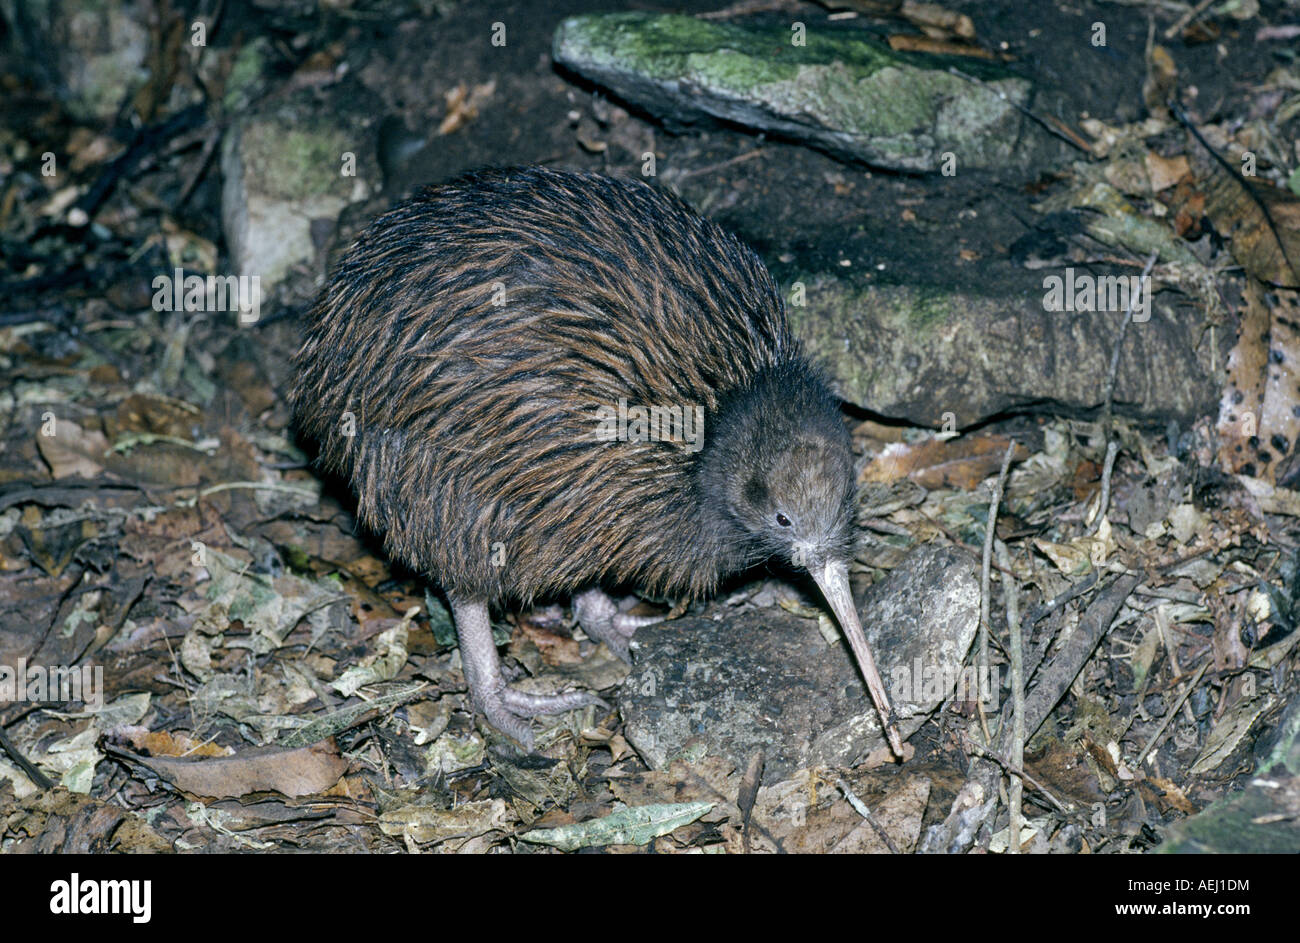 A kiwi is any of the species of small flightless birds endemic to New Zealand of the genus Apteryx Stock Photo